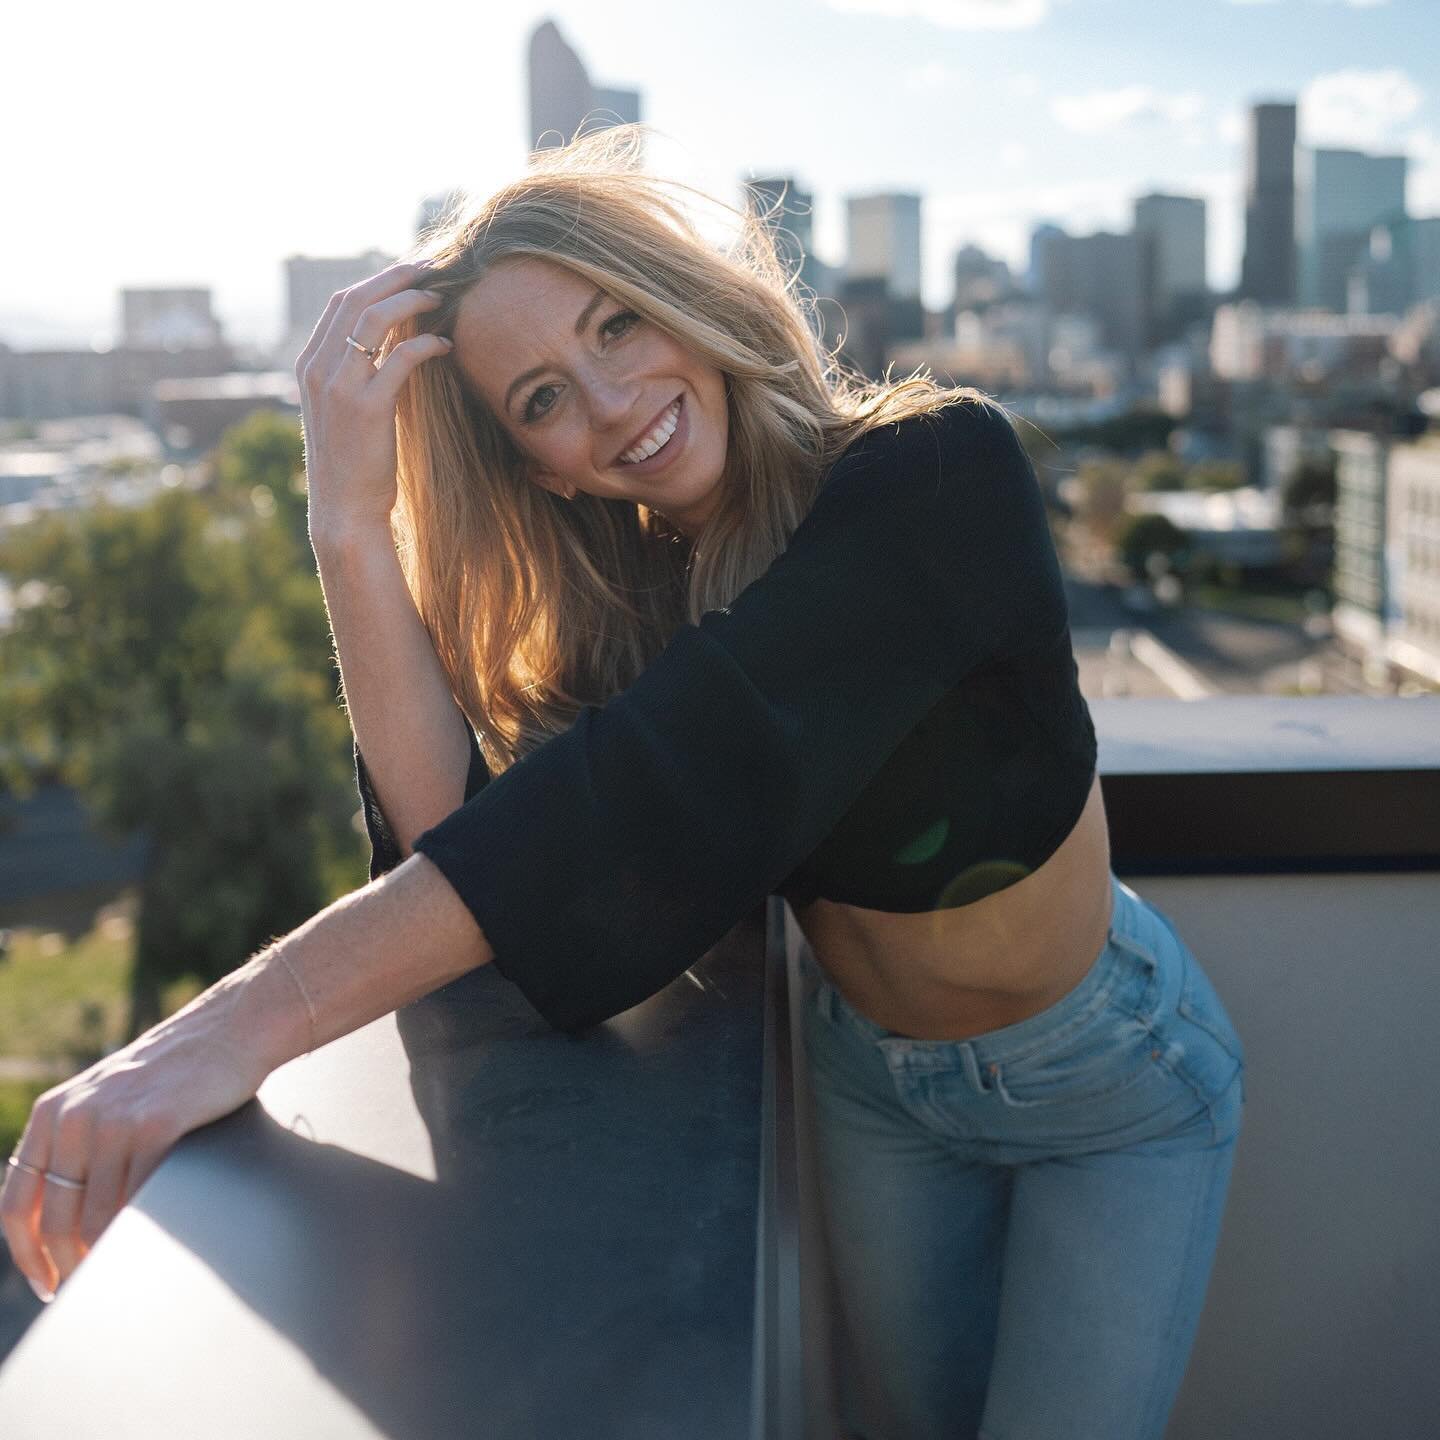 Just a girlie trying to decide what #mood she's going to bless* everyone with for the day 😎🙃😃.

#sunny#morning#denver#colorado#photography#feelgood#sunshine#tan#sunset#smile#photography#fitness#jeans#makeup#blonde#moody#knowthyself#xo